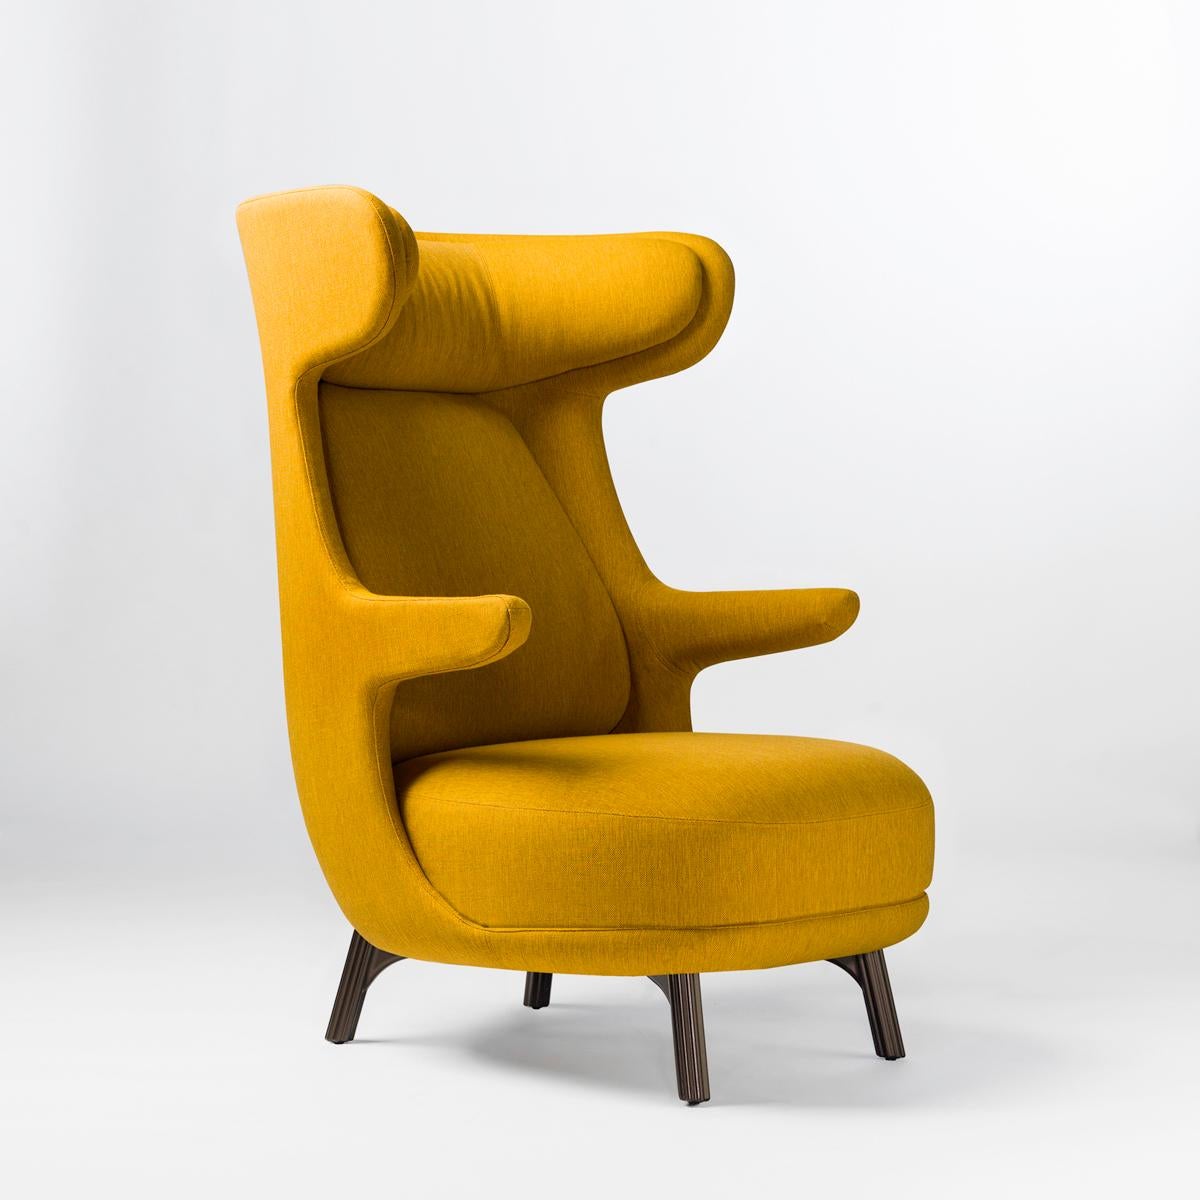 Jaime Hayon, Contemporary, Monocolor in Yellow Fabric Upholstery Dino Armchair In New Condition For Sale In Barcelona, Barcelona